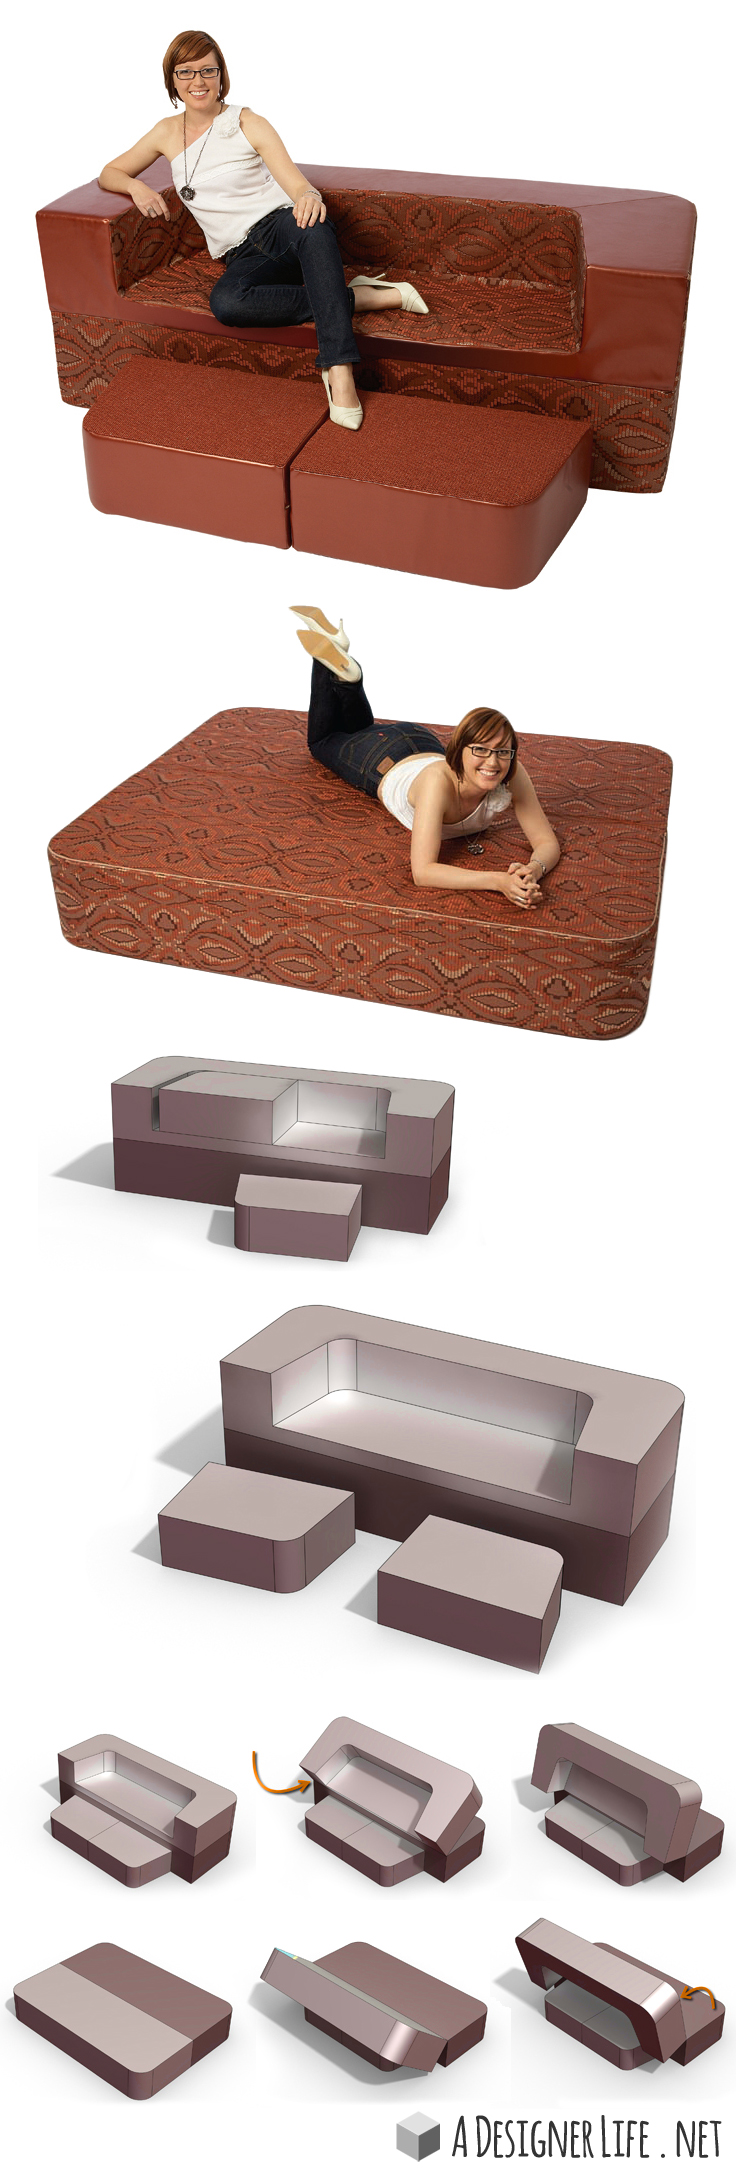 This convertible sofa creates a double bed in 3 seconds - brilliant! #product_design